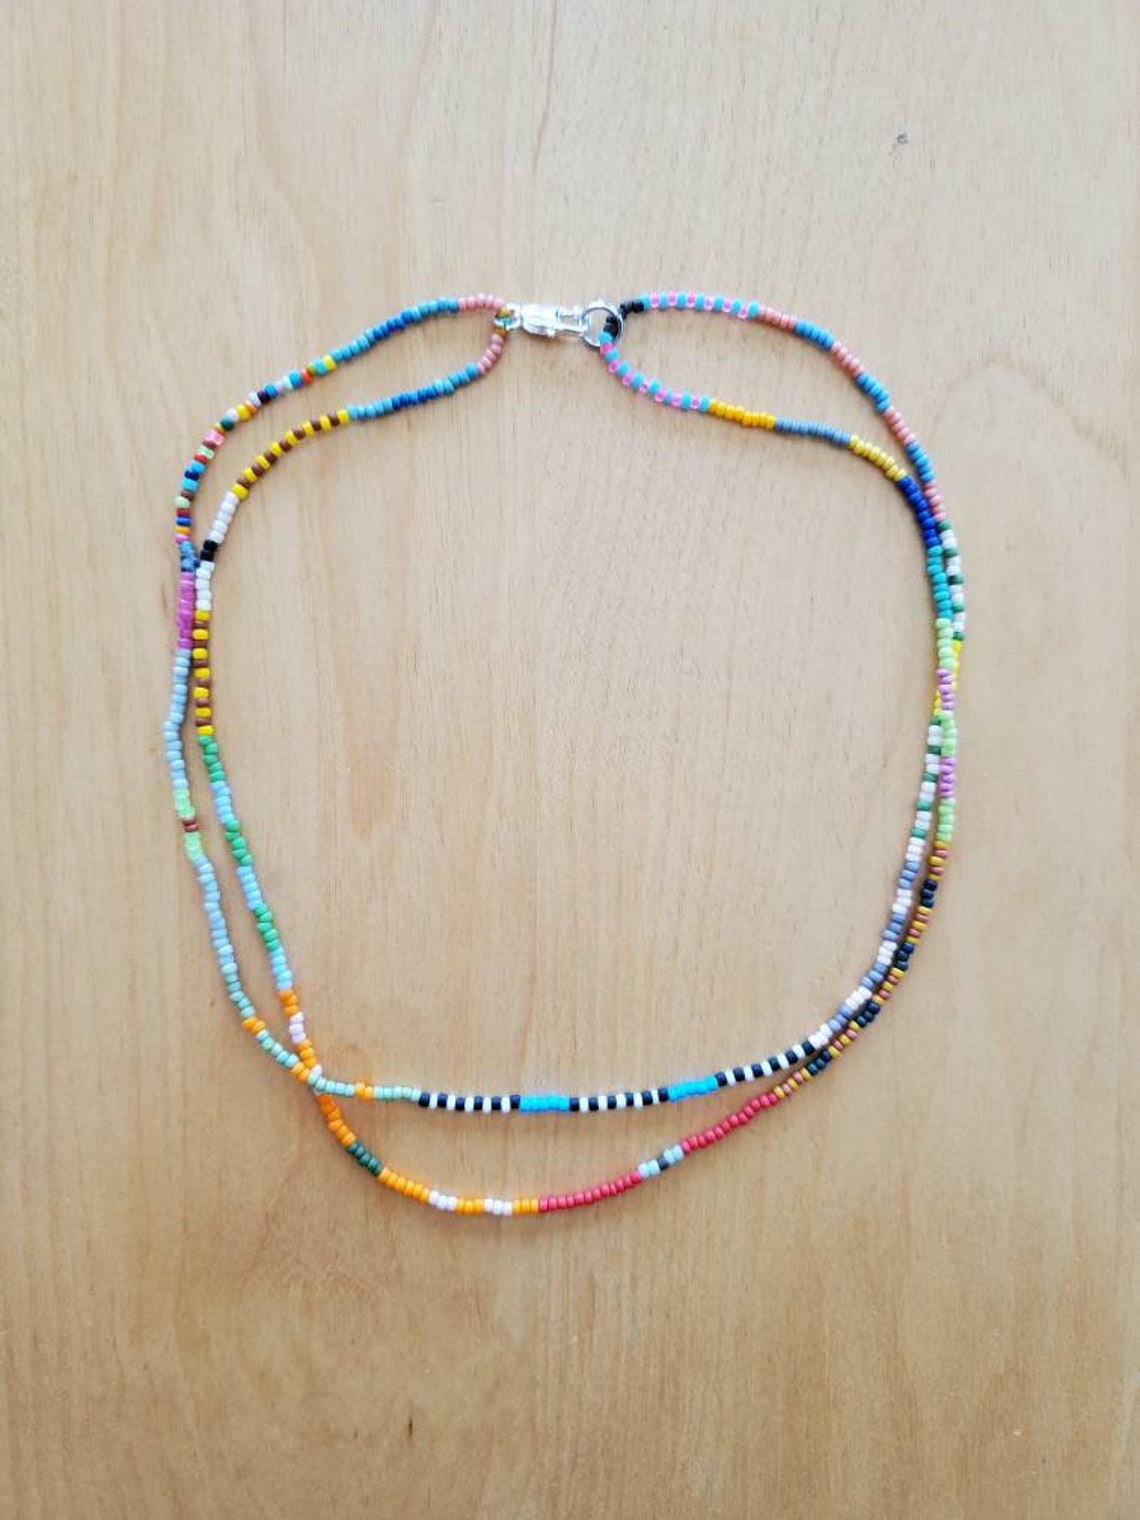 Doubled up Beaded Necklace Choker Multicolored Multi Pattern - Etsy